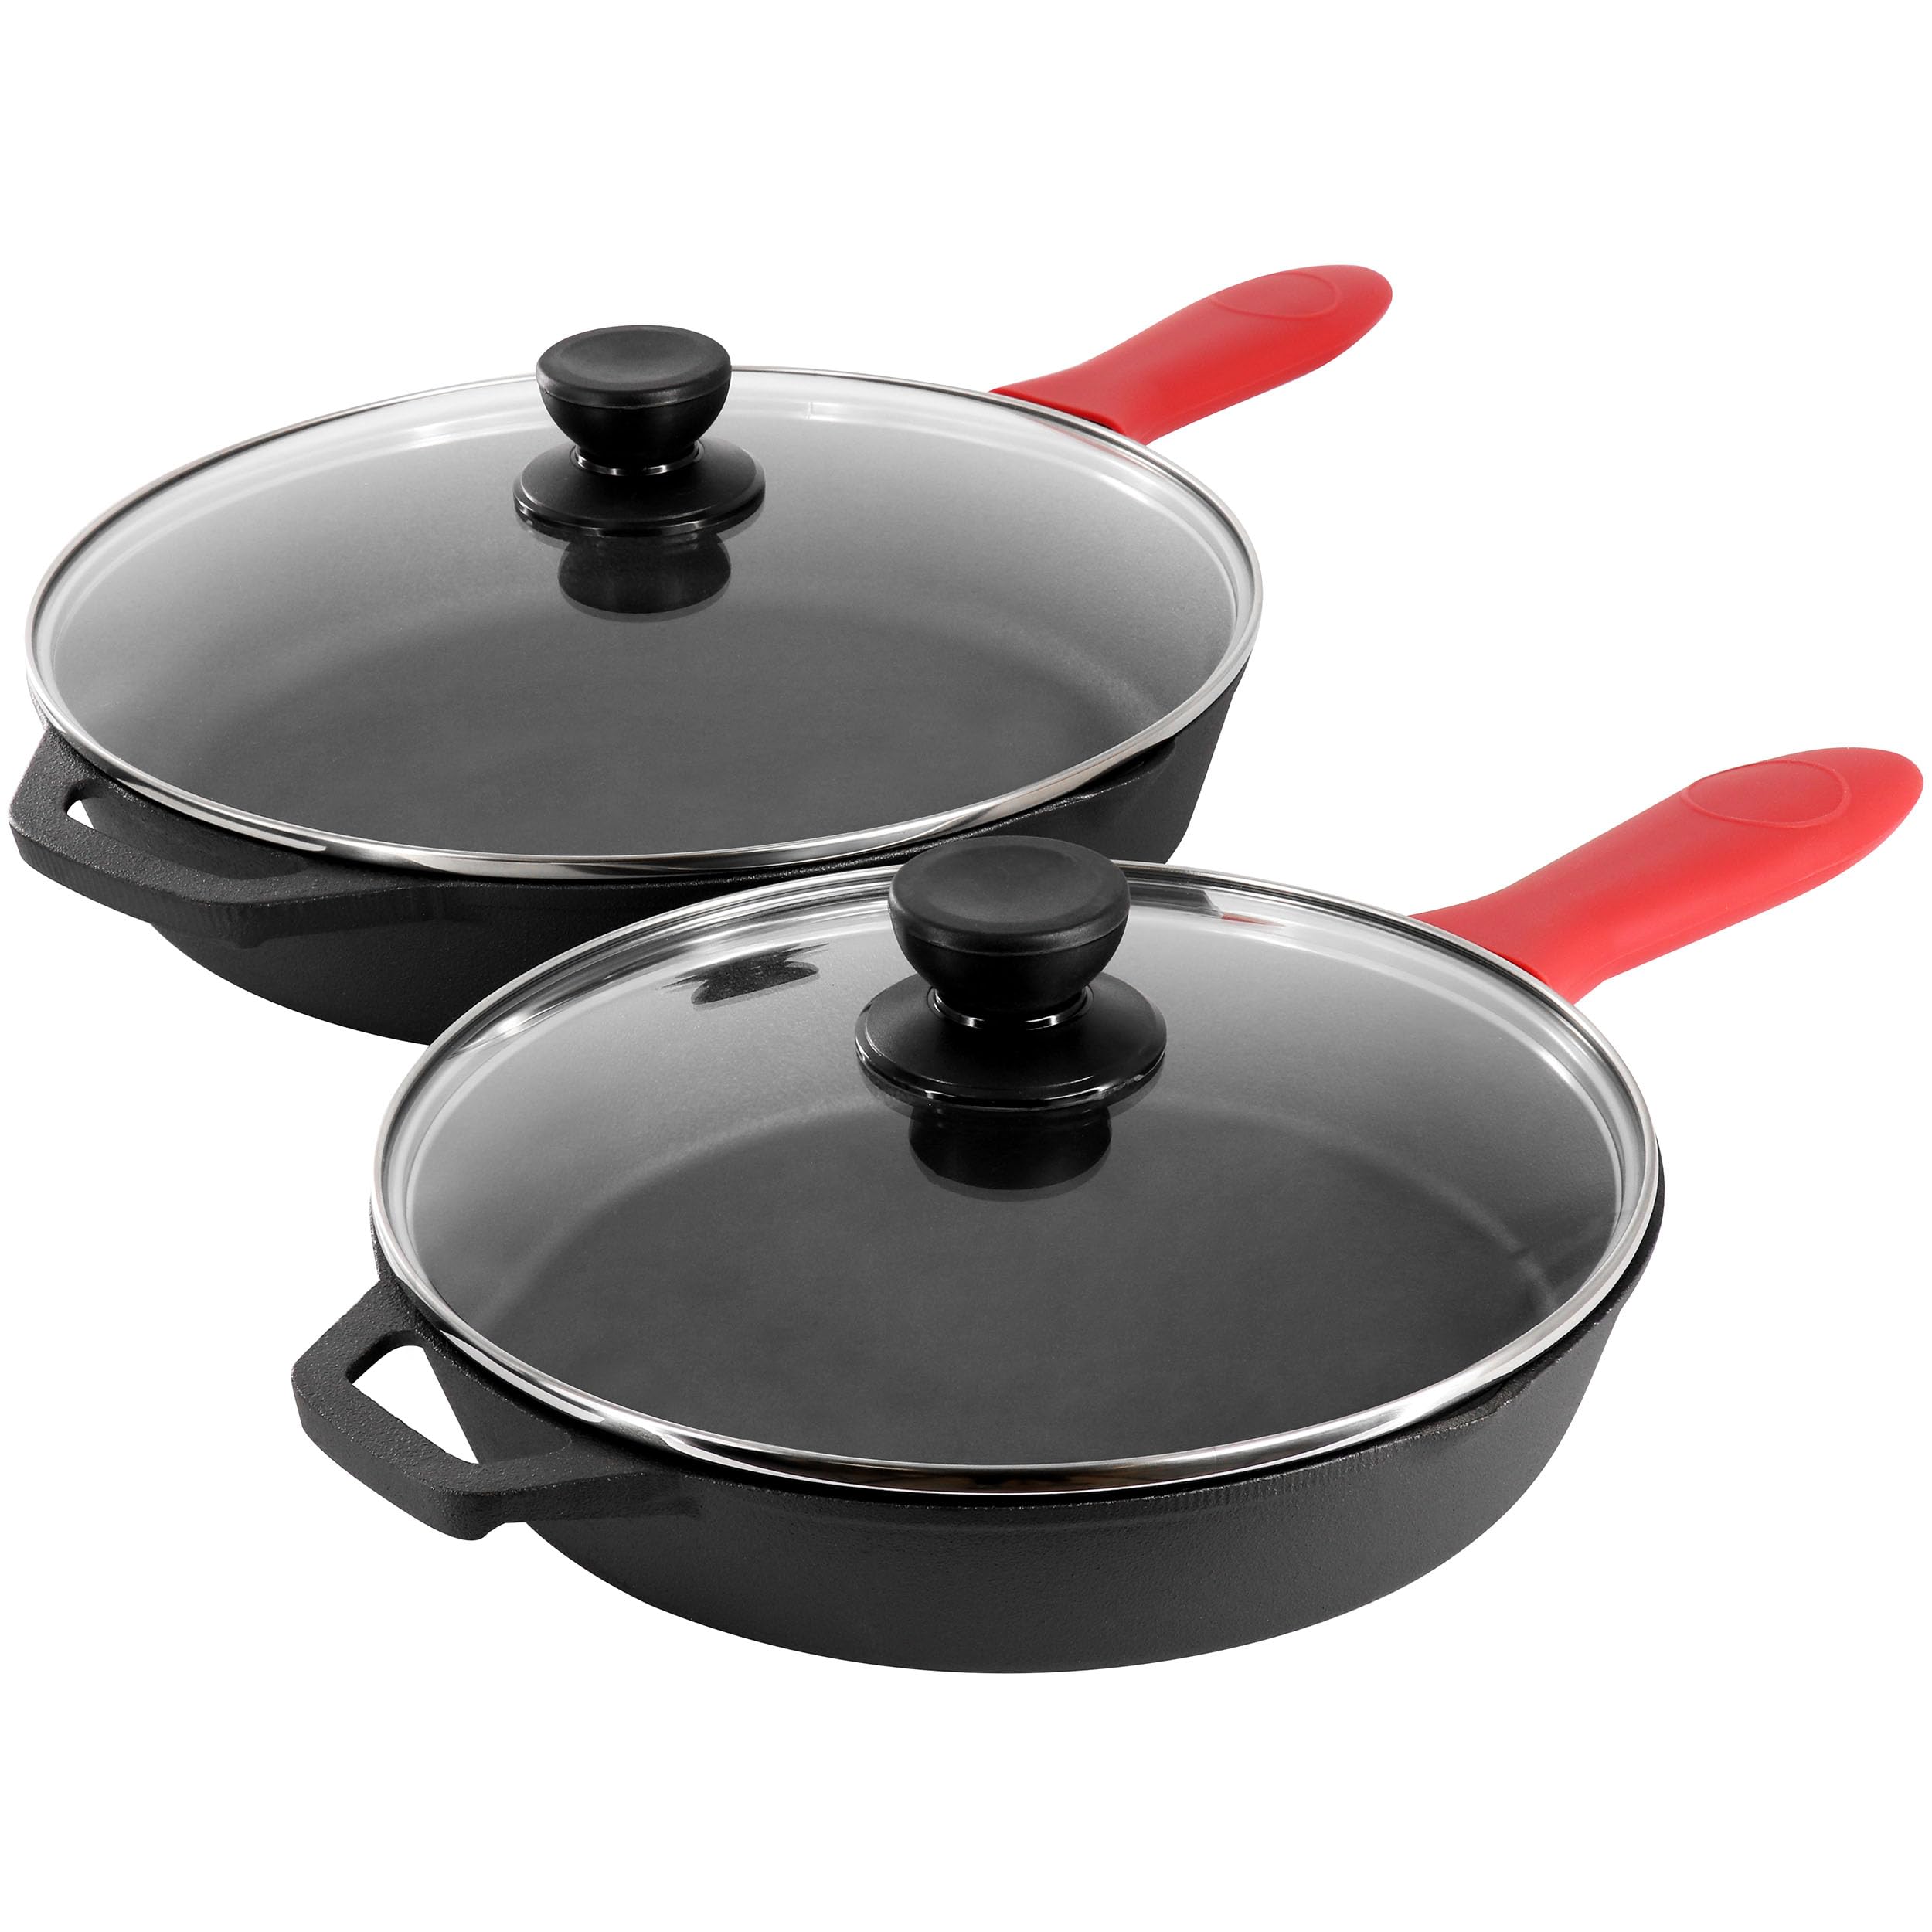 Megachef 13 Piece Pre-Seasoned Cast Iron Skillet Set with Temperd Glass Lids and Silicone Holders